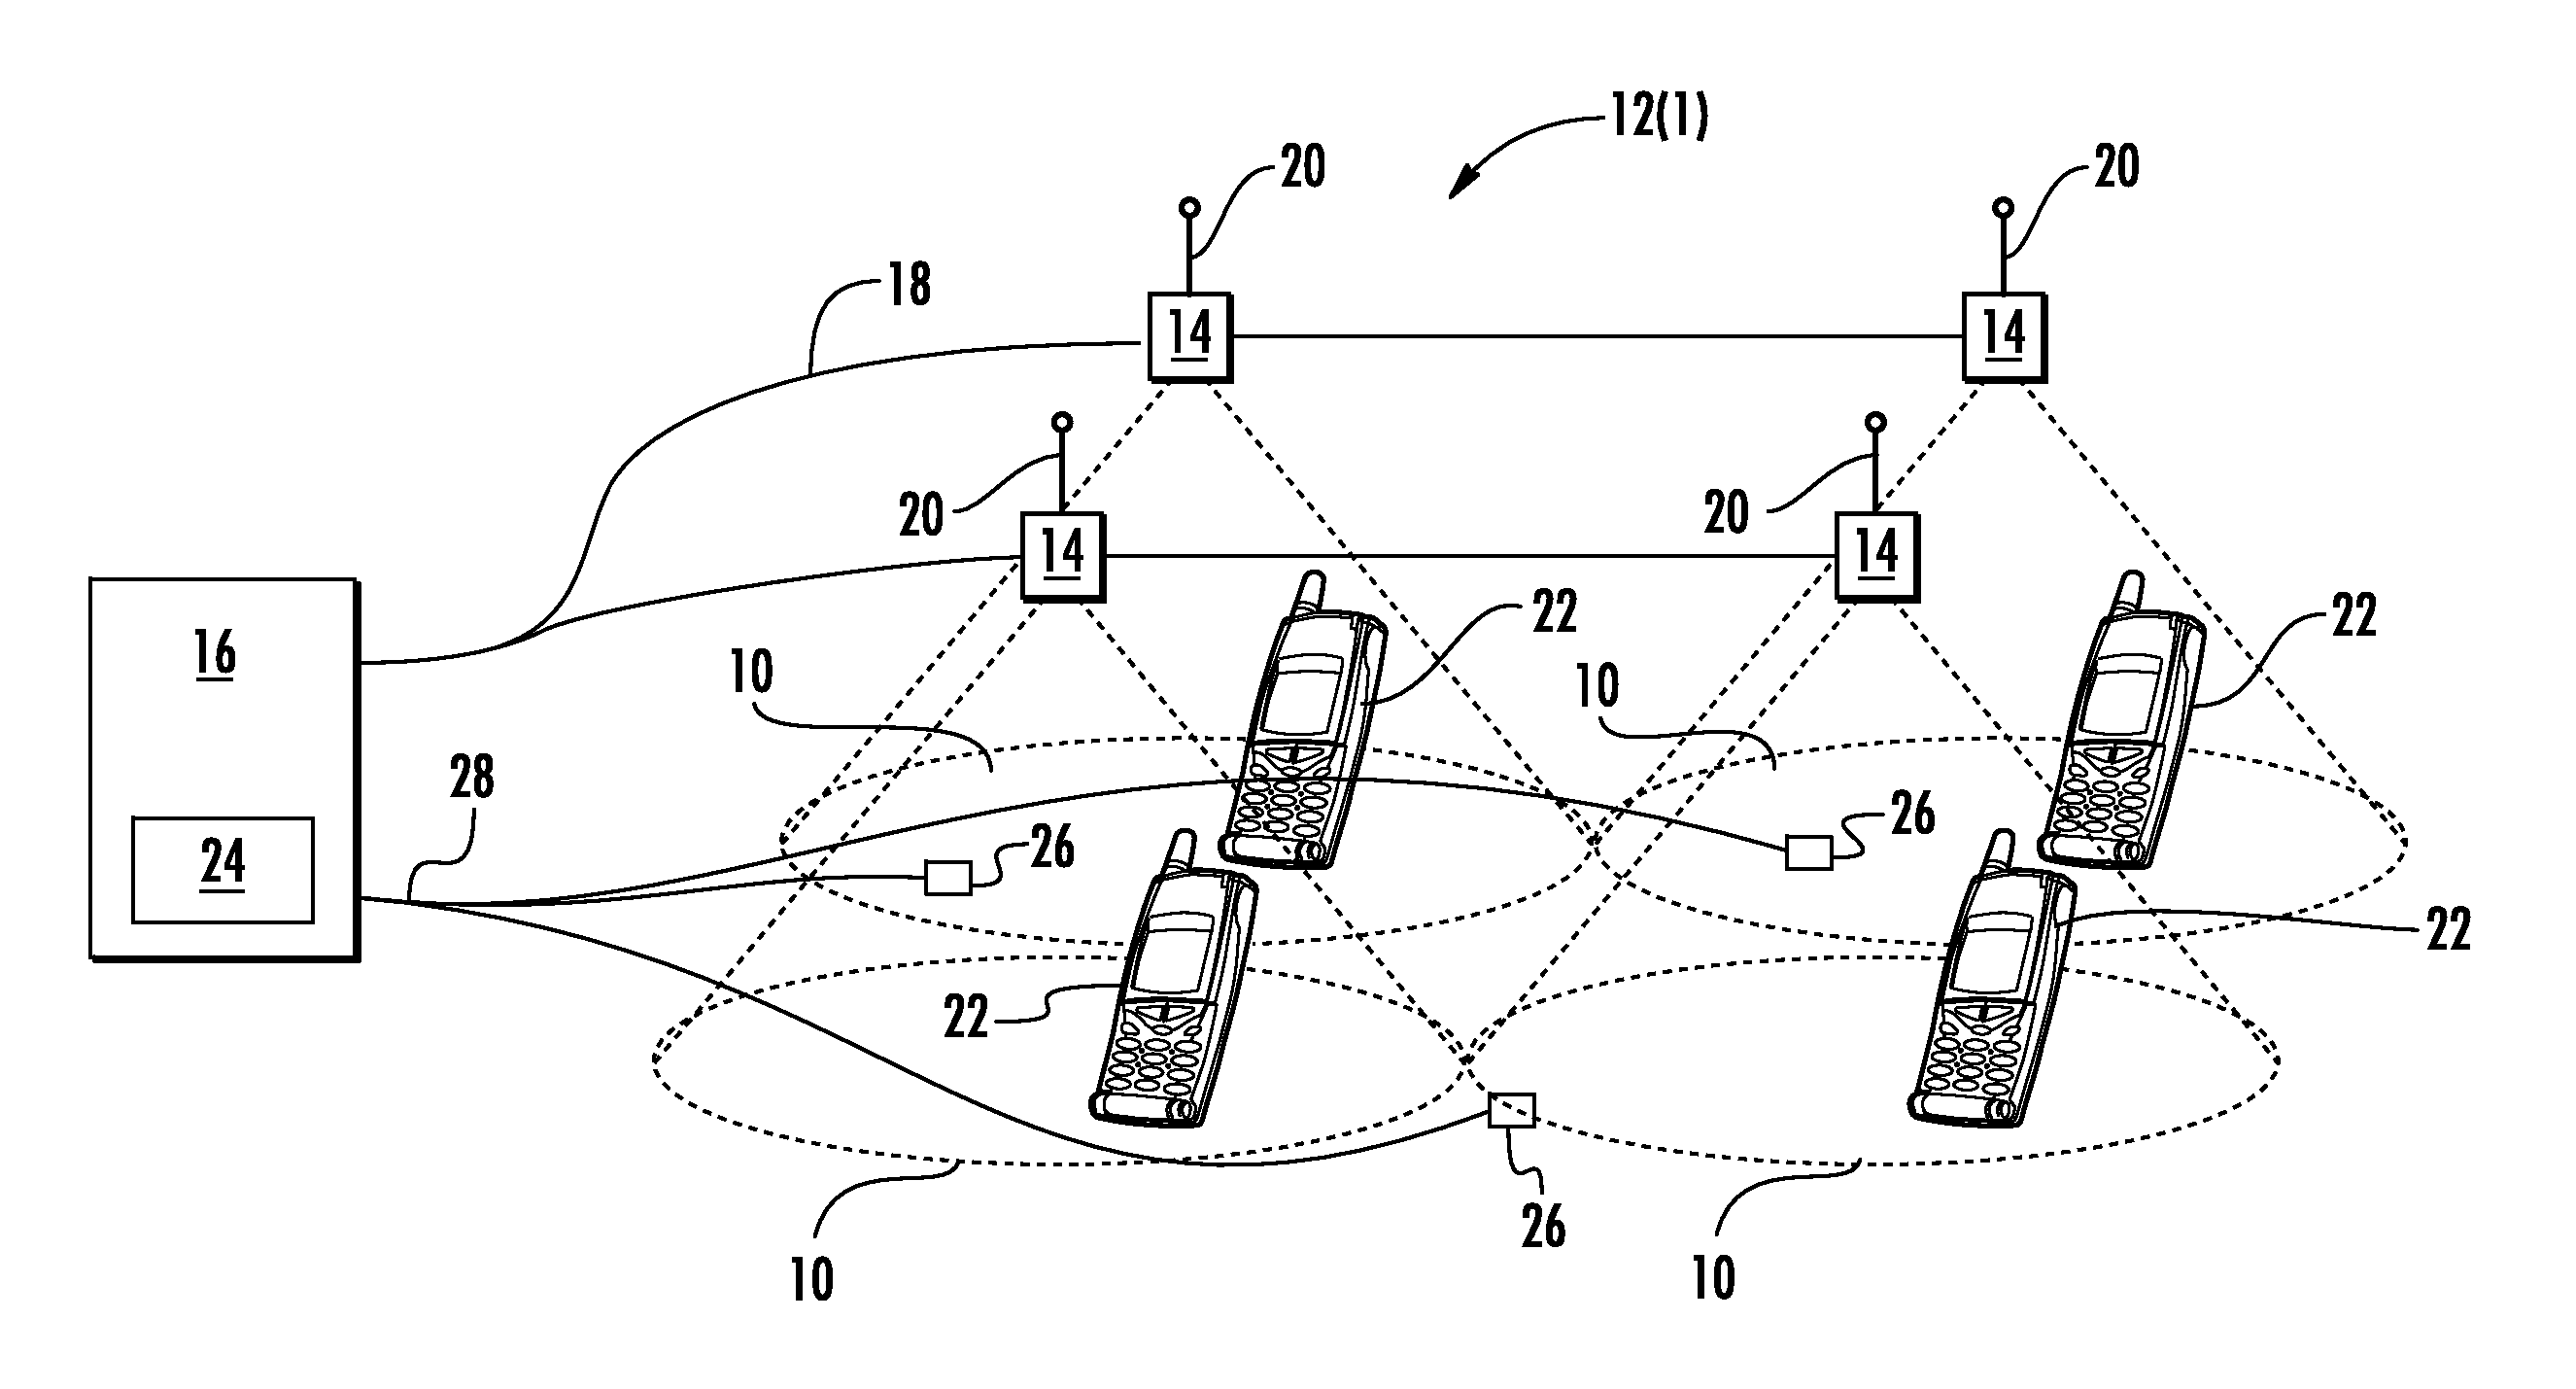 Power management in distributed antenna systems (DASs), and related components, systems, and methods